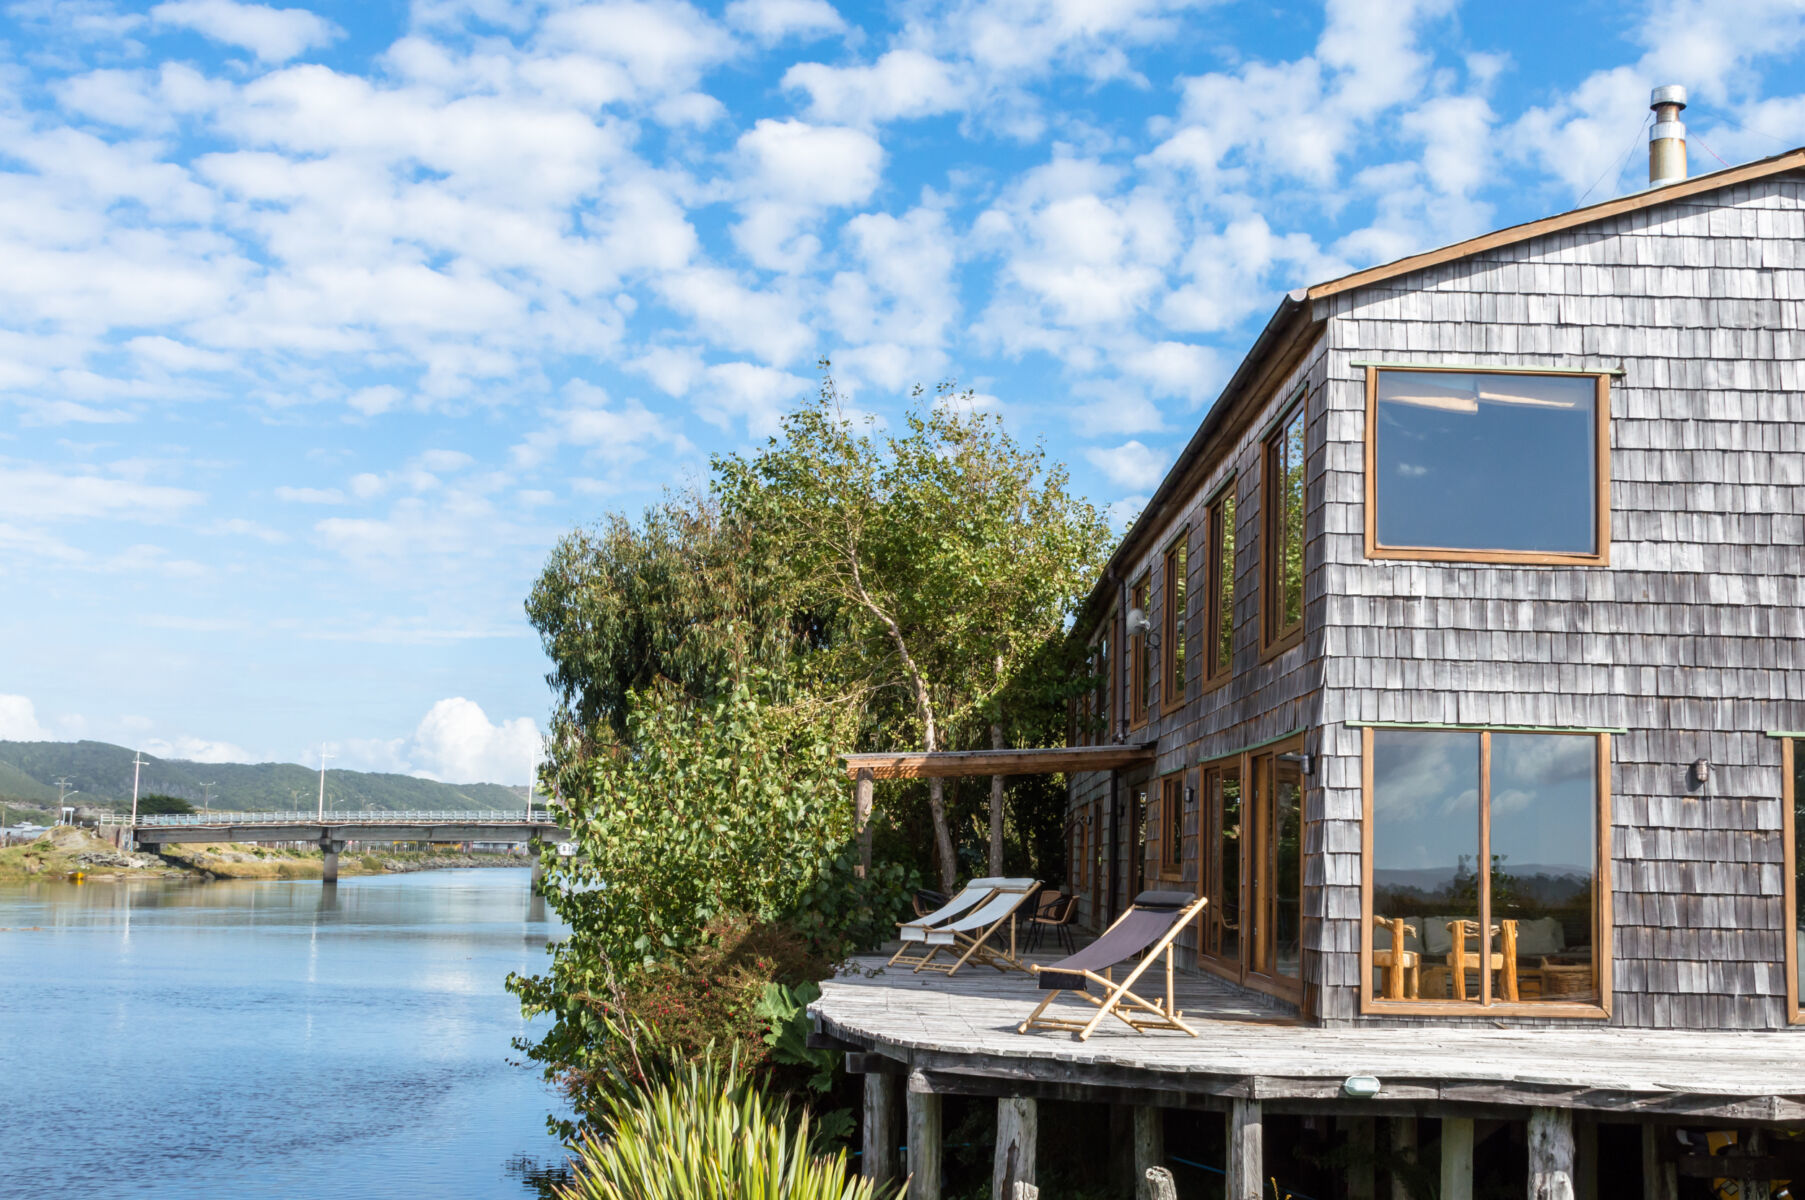 The wooden shingled Cucao Palafito that sits on stilts above a river in Chiloe